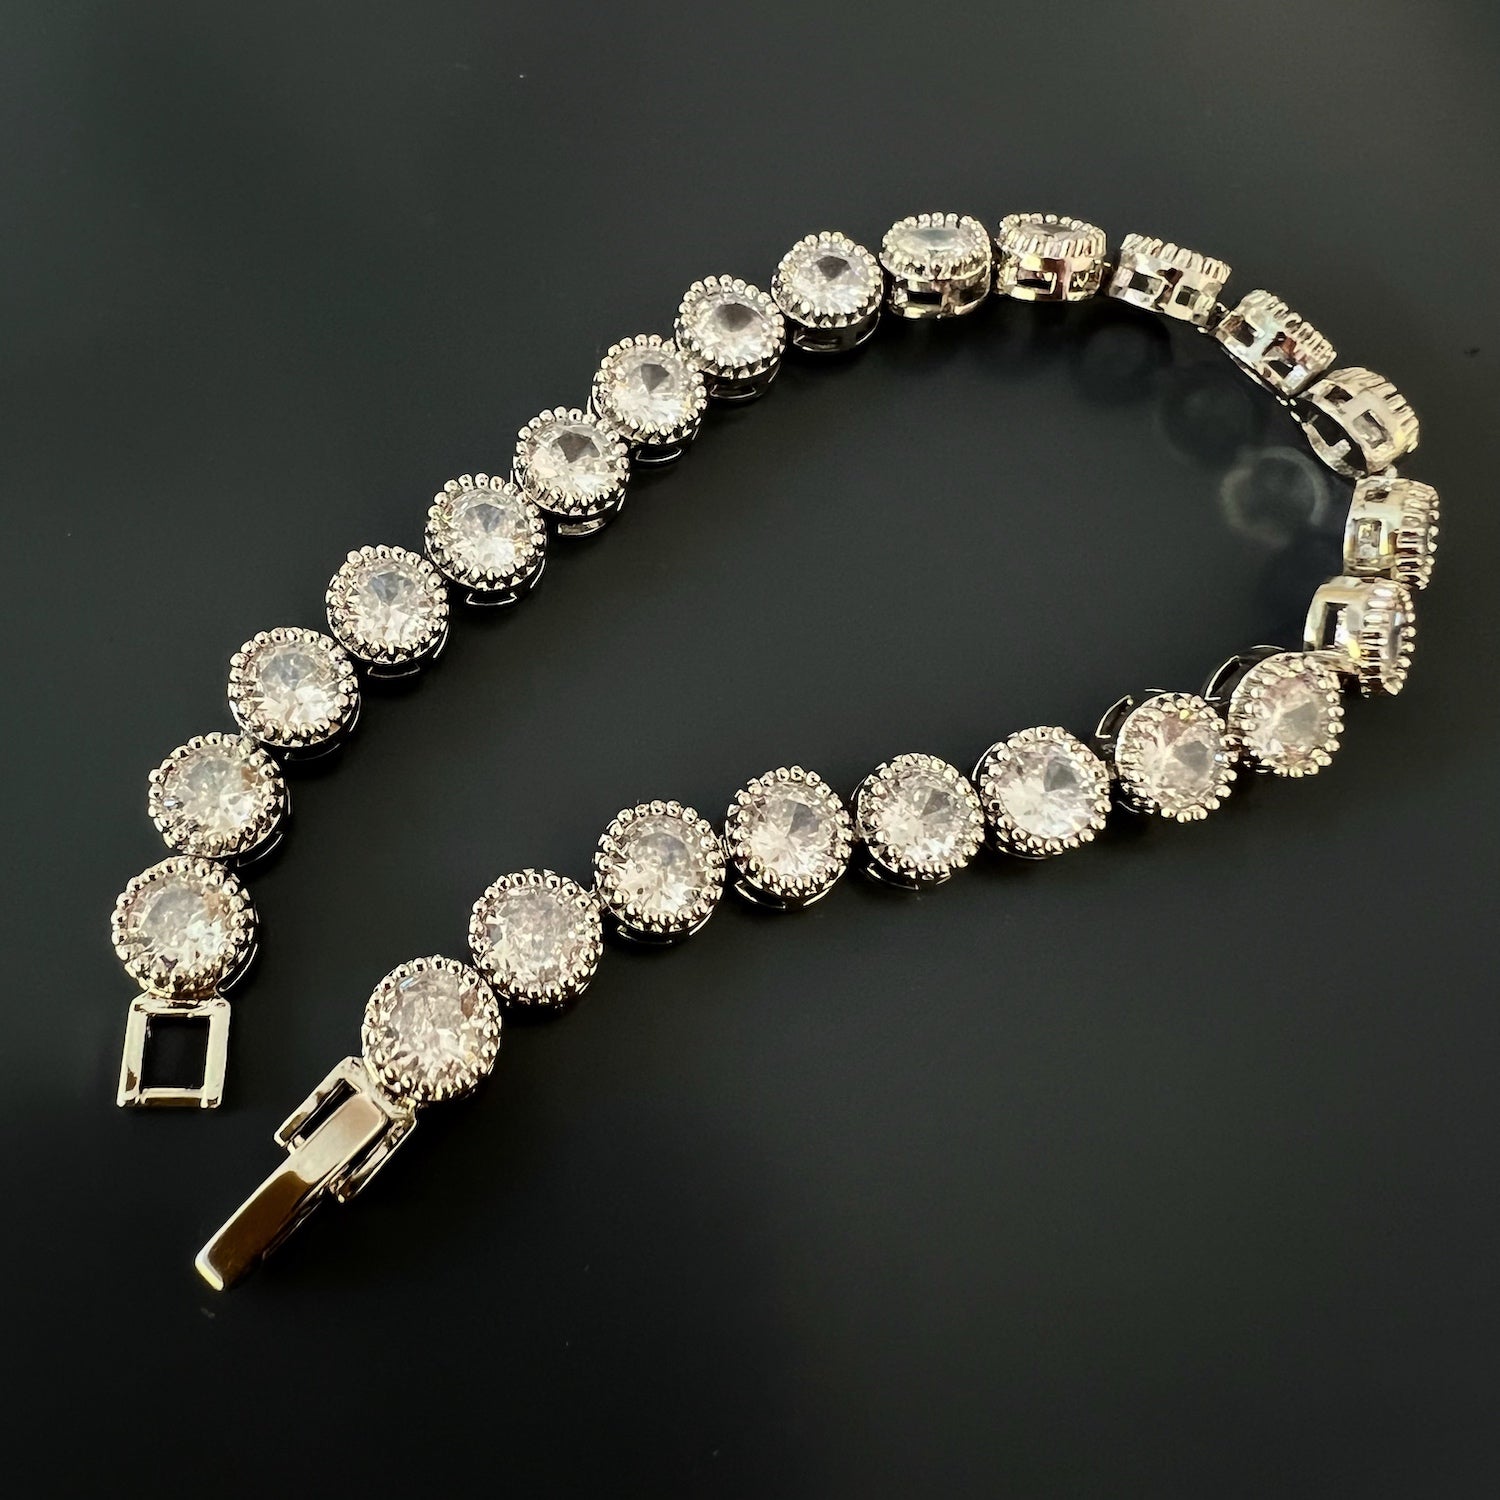 Top view of the vintage-style Diamond Tennis Bracelet, featuring a line of brilliant diamonds set in a delicate silver on brass band.